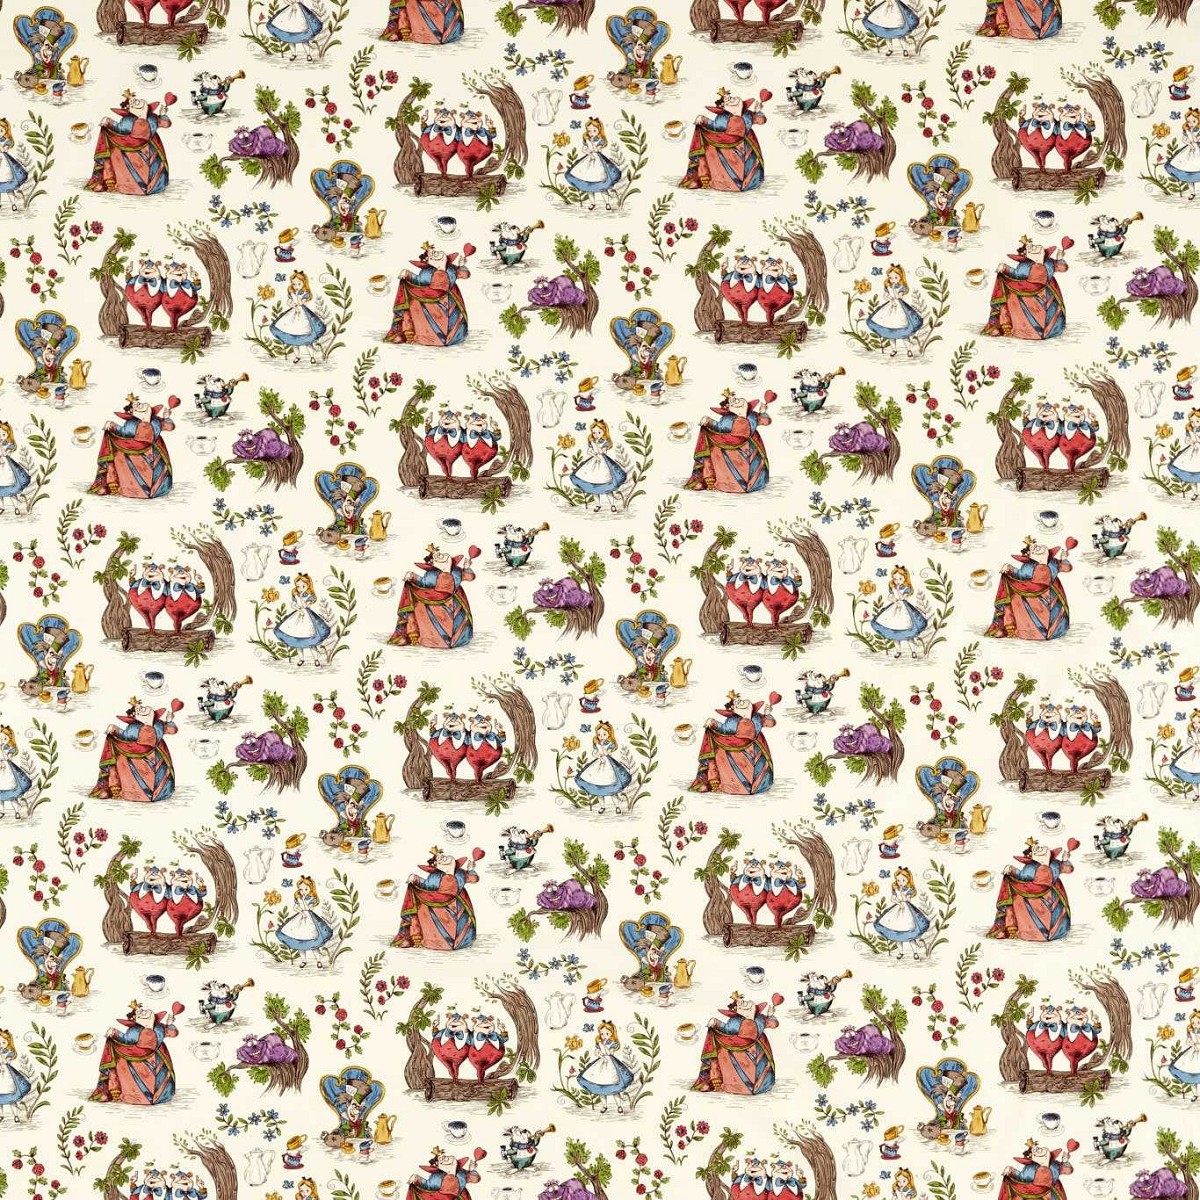 Alice In Wonderland Hundreds & Thousands Fabric by Sanderson